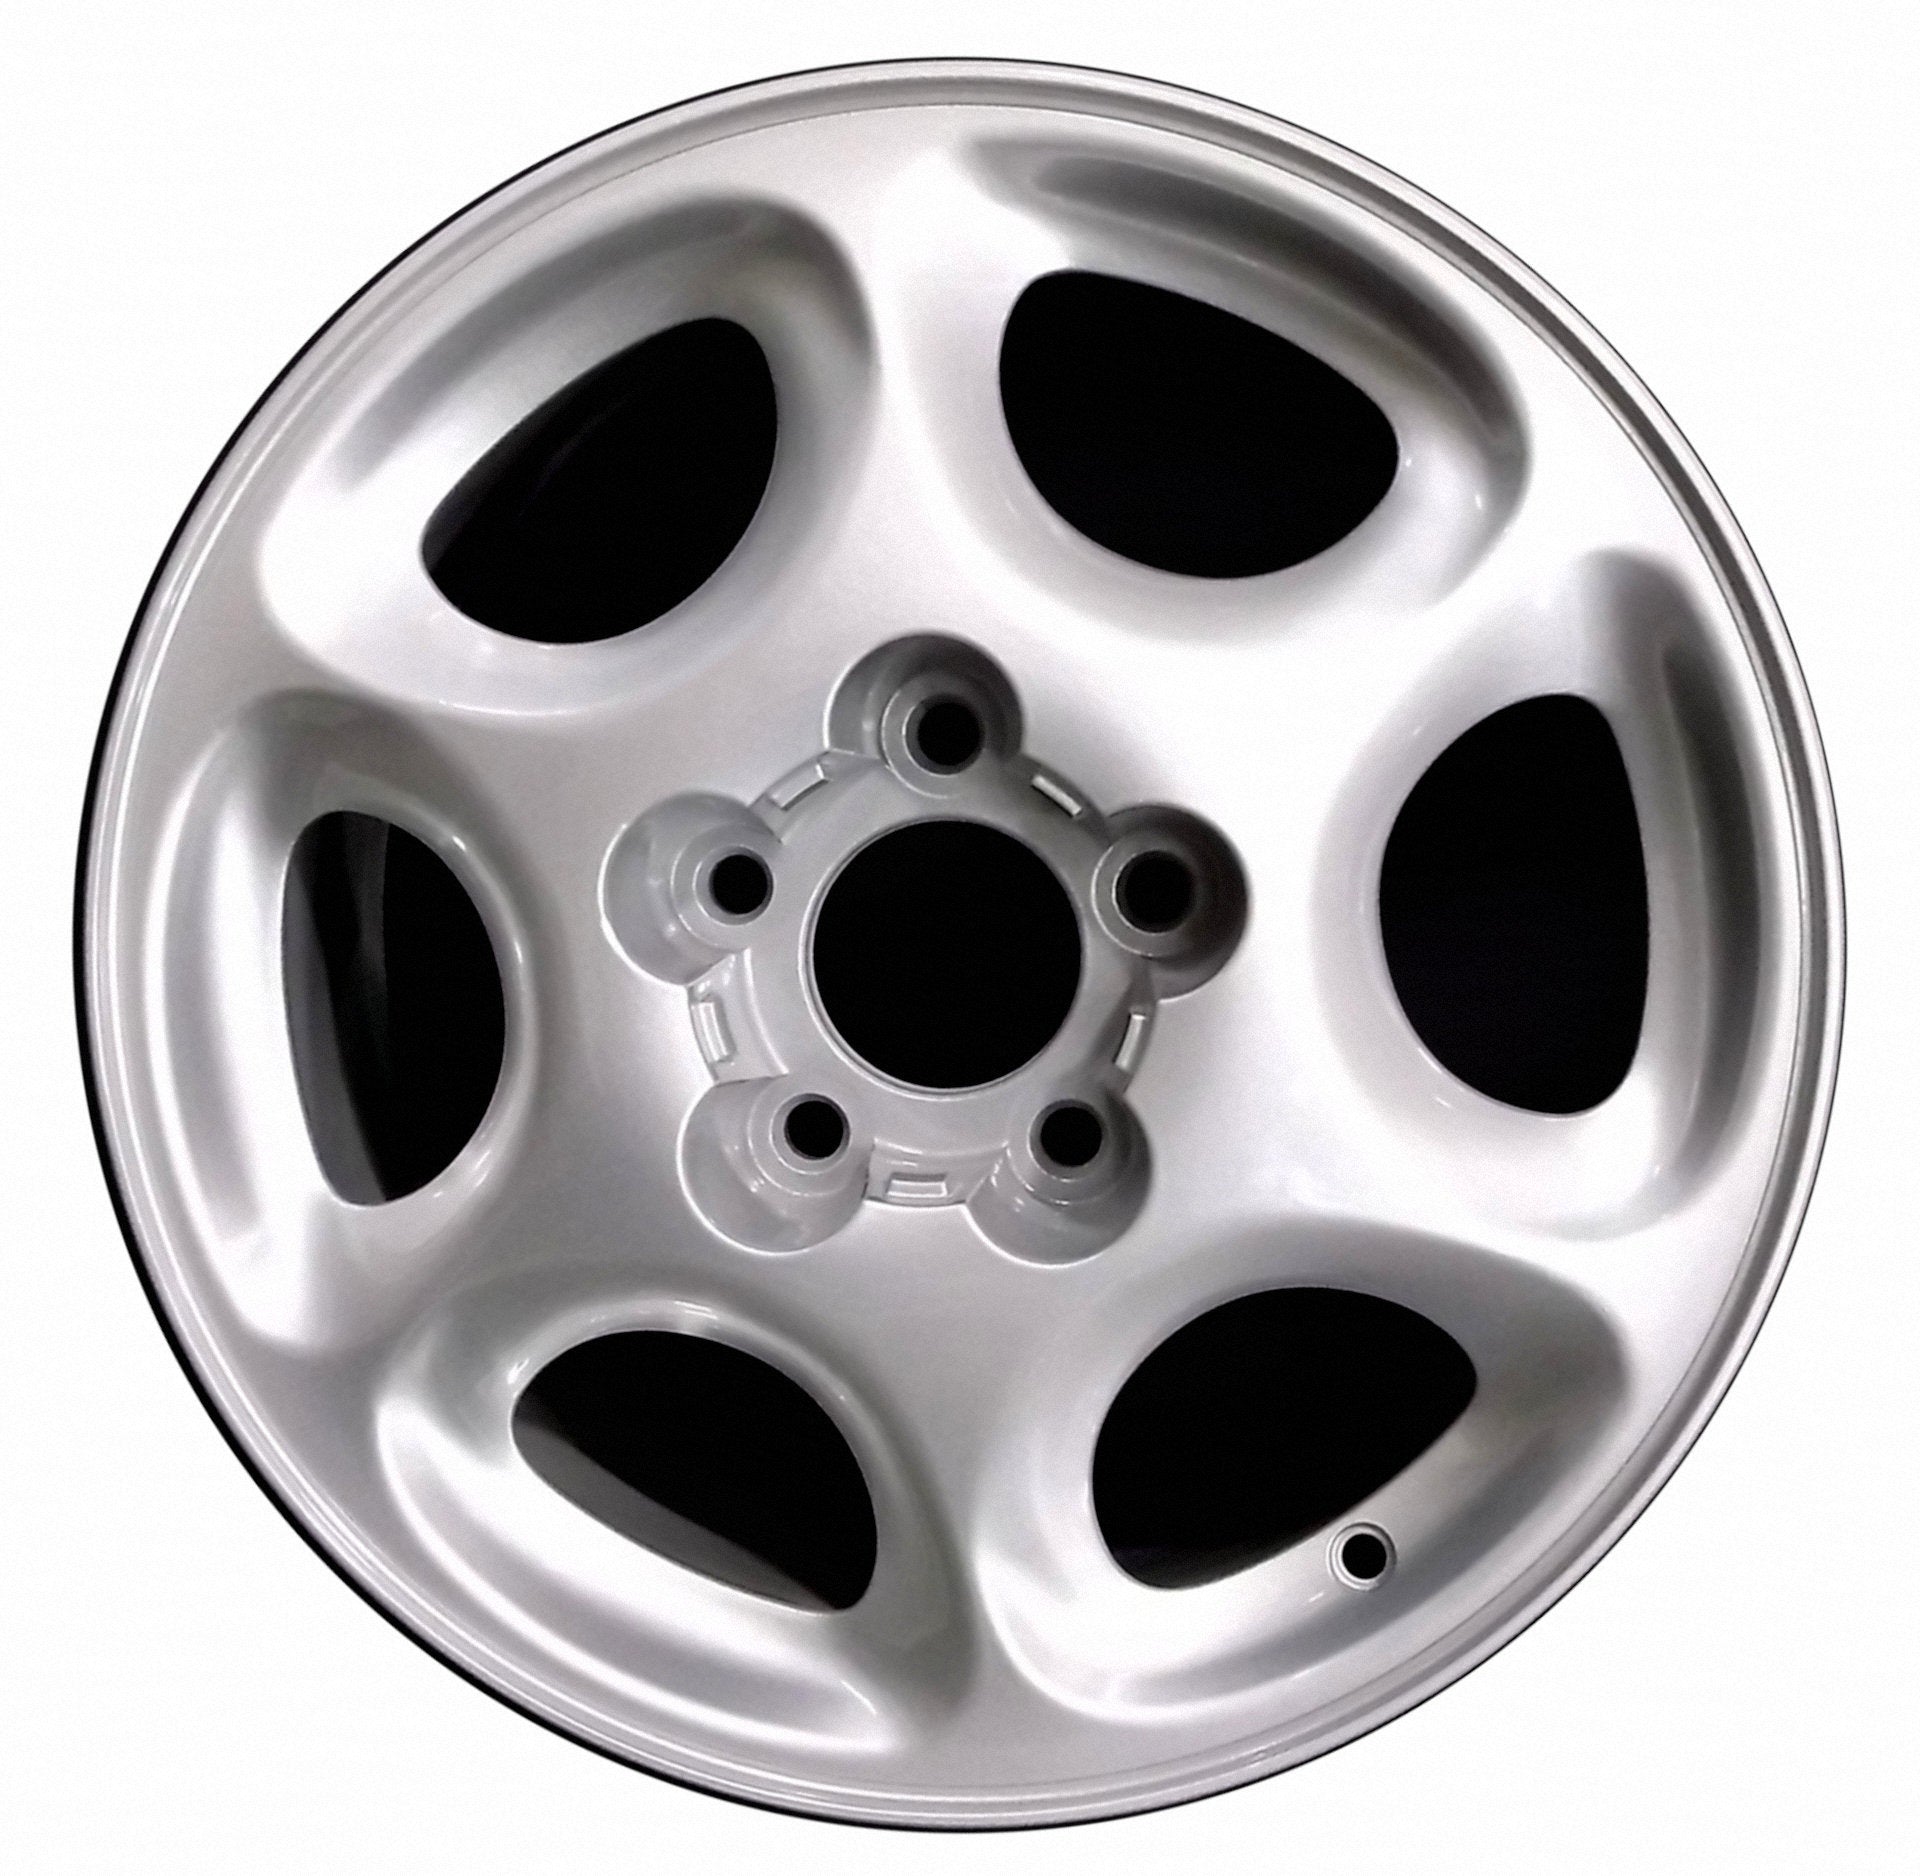 Oldsmobile Intrigue  1998, 1999, 2000 Factory OEM Car Wheel Size 16x6.5 Alloy WAO.6030.PS02.FF